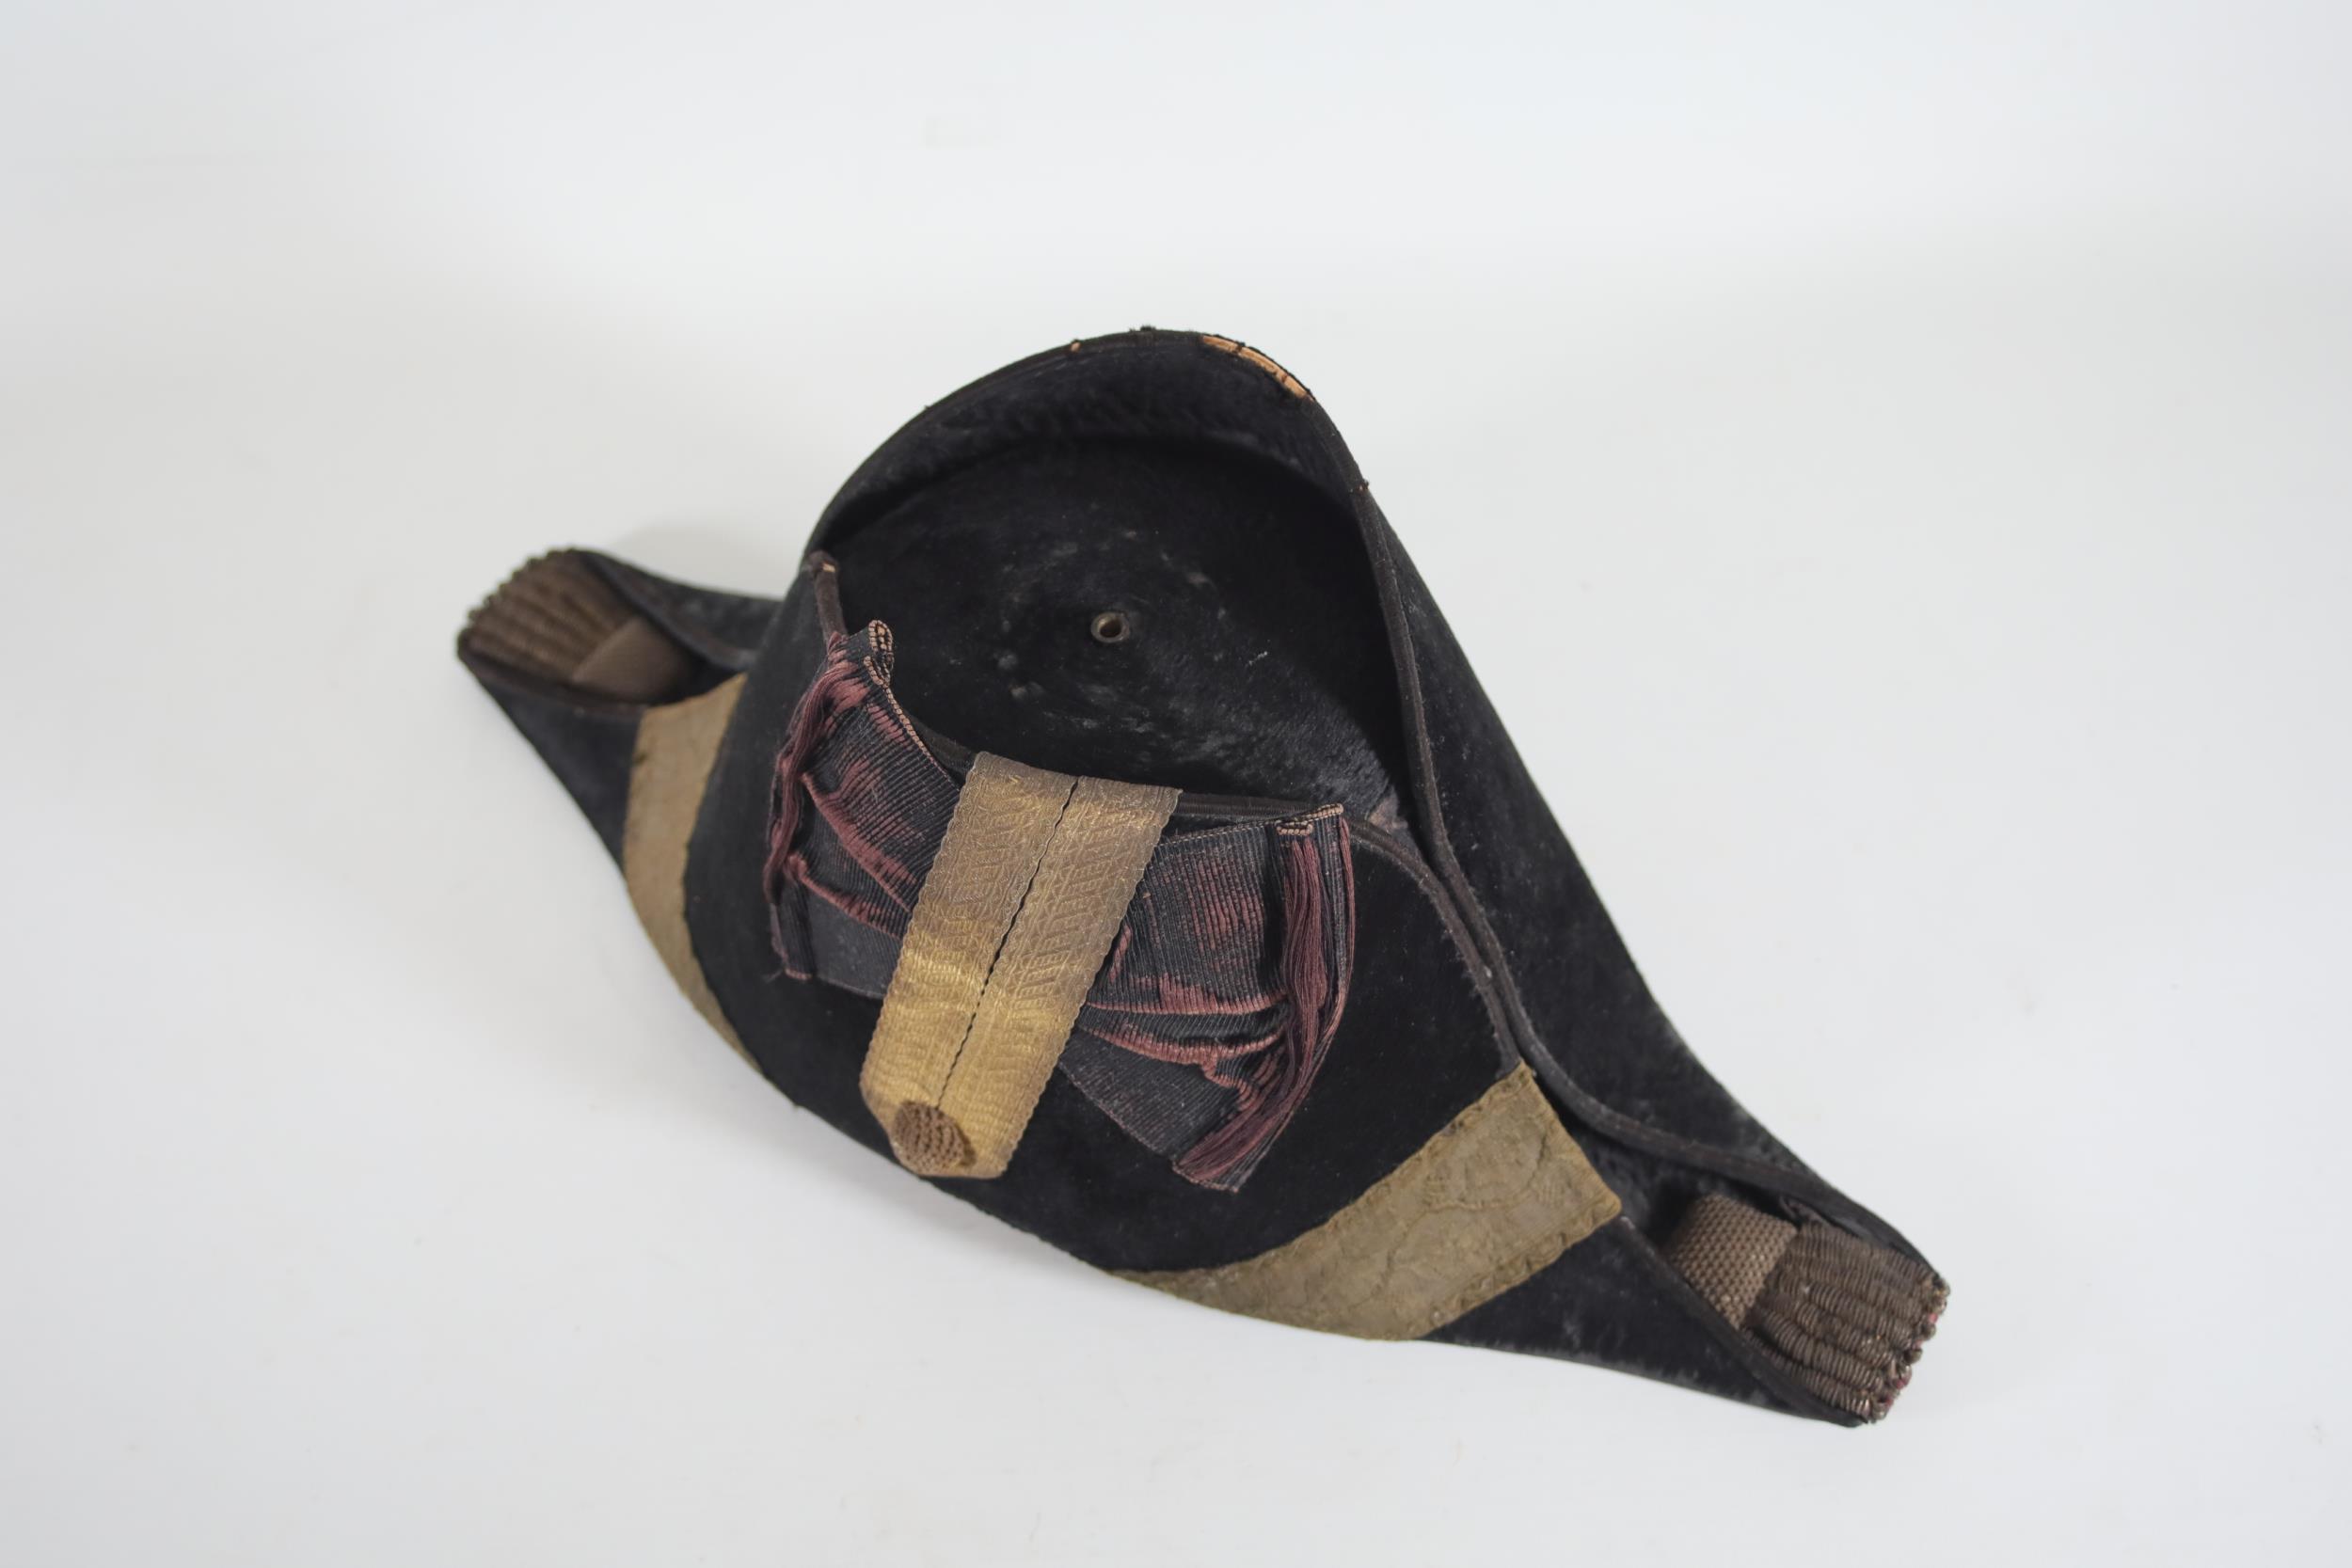 Antique bicorn hat and case naval circa 19th to early 20th century - Image 3 of 8